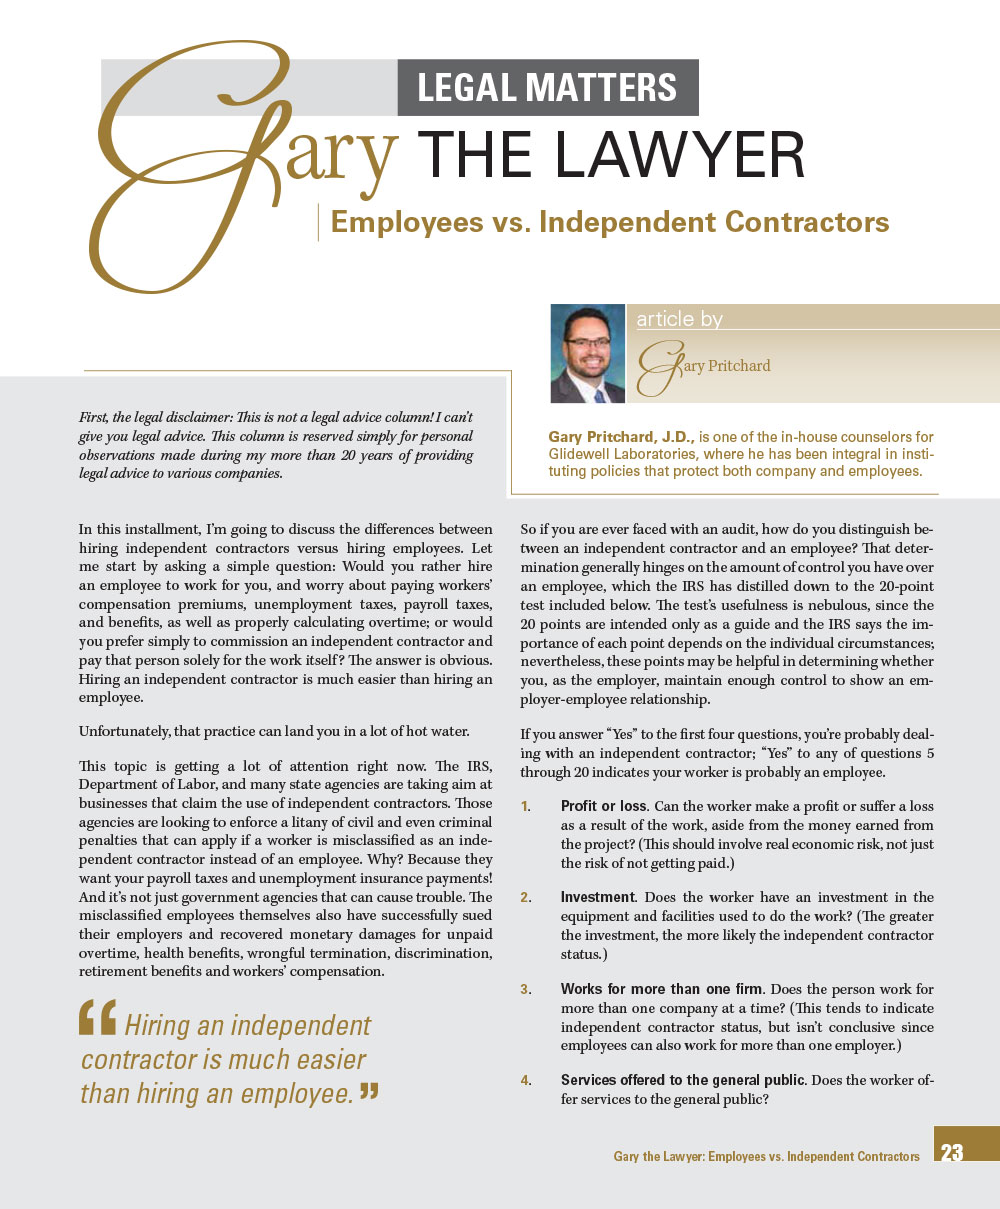 Legal Matters: Gary the Lawyer - Employees vs. Independent Contractors